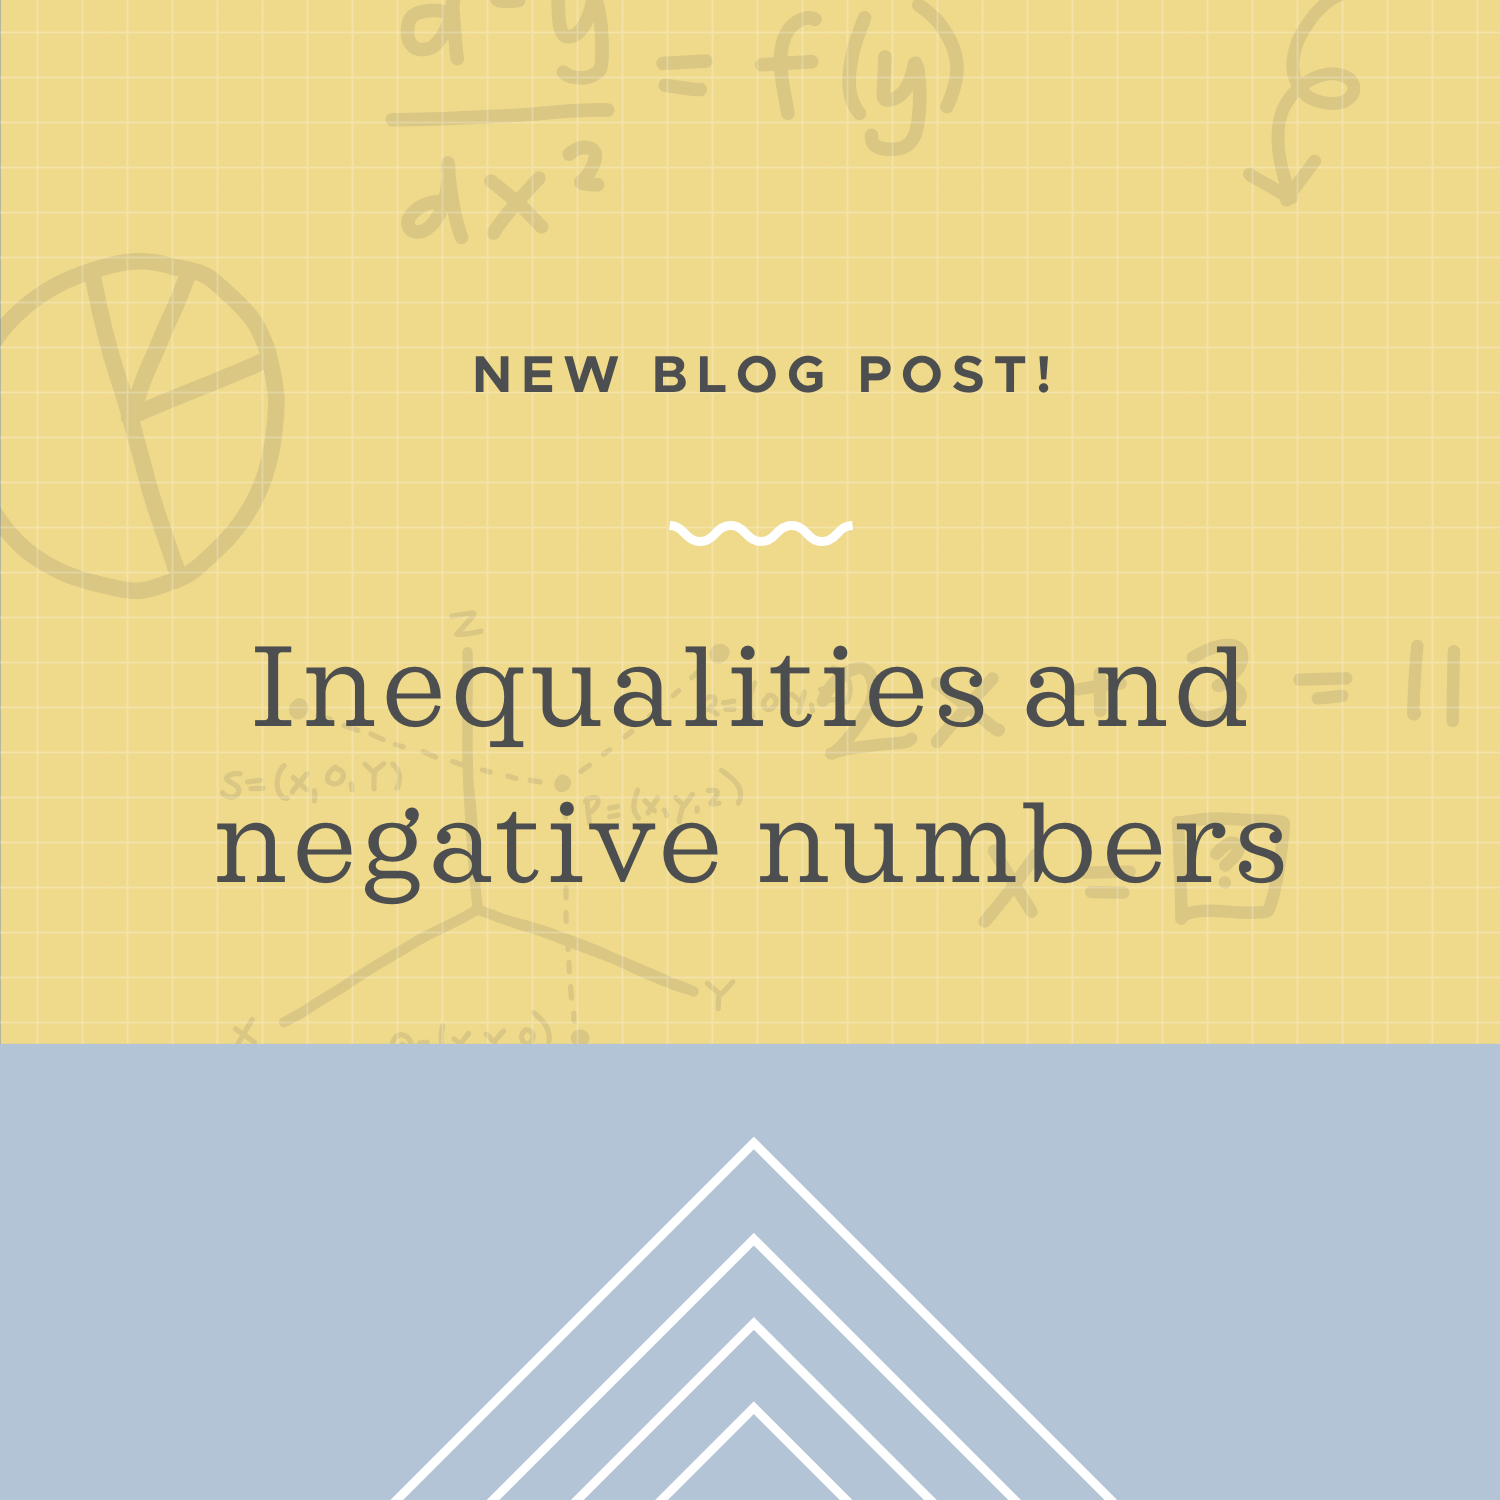 How negative numbers flip the sign of the inequality — Krista King